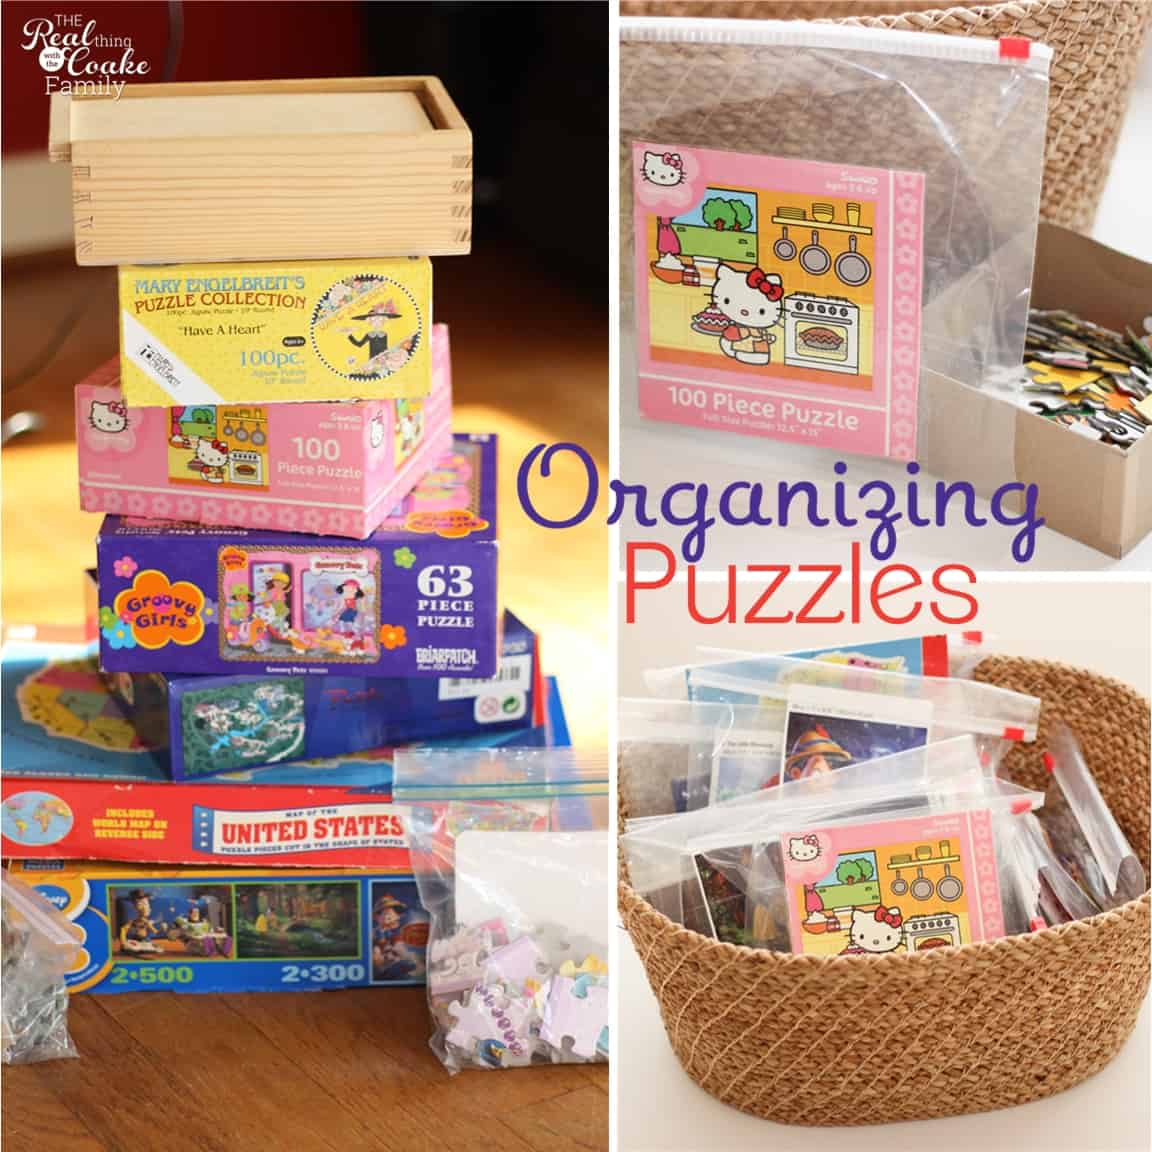 Organizing tips ~ How to quickly and simply organize puzzles. #Organizing #Tips #Puzzles #RealCoake